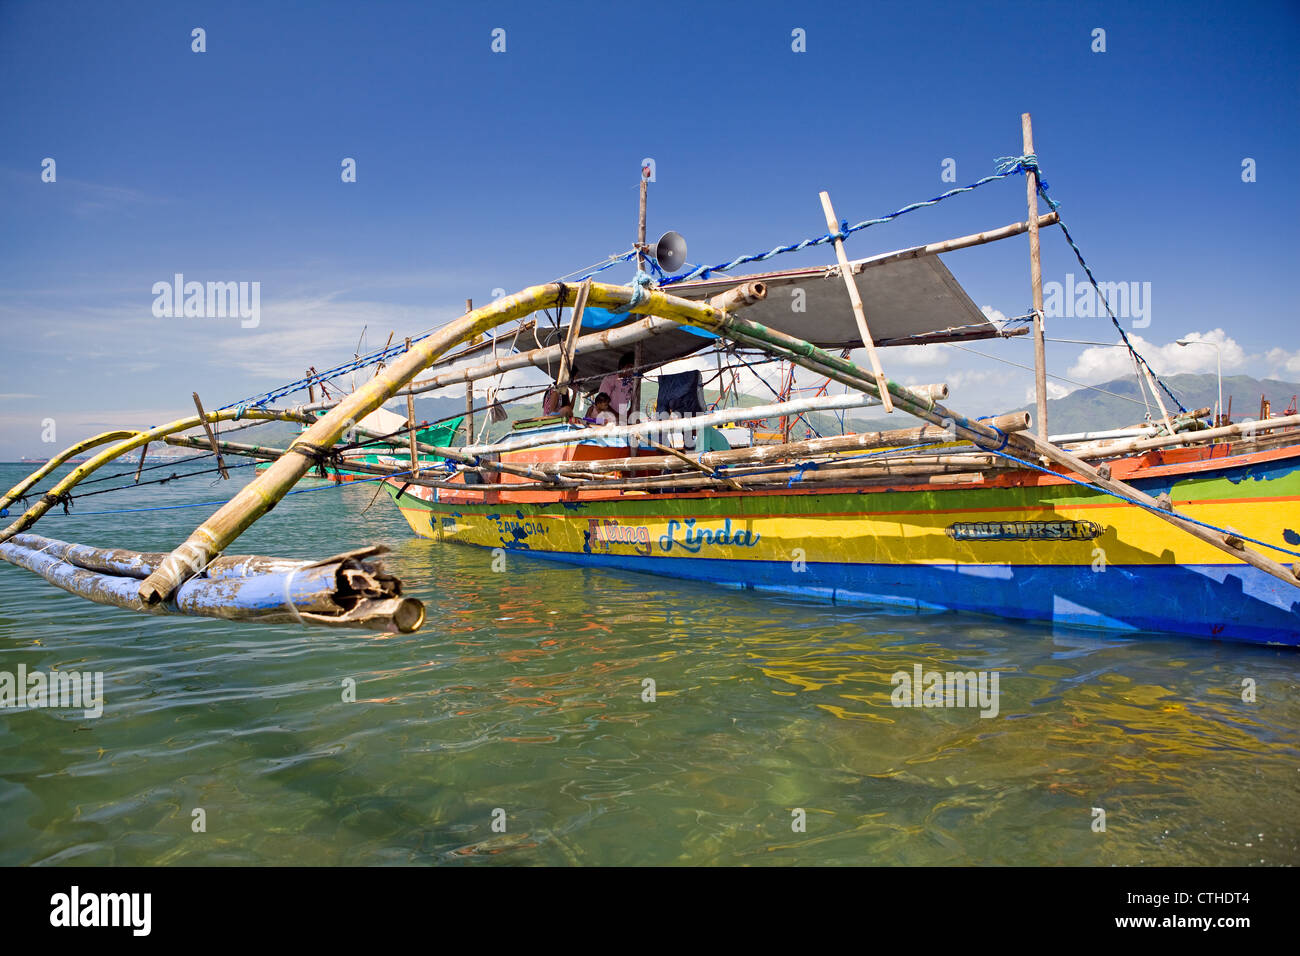 https://c8.alamy.com/comp/CTHDT4/filipino-paraw-is-a-large-outrigger-canoe-used-for-commercial-fishing-CTHDT4.jpg